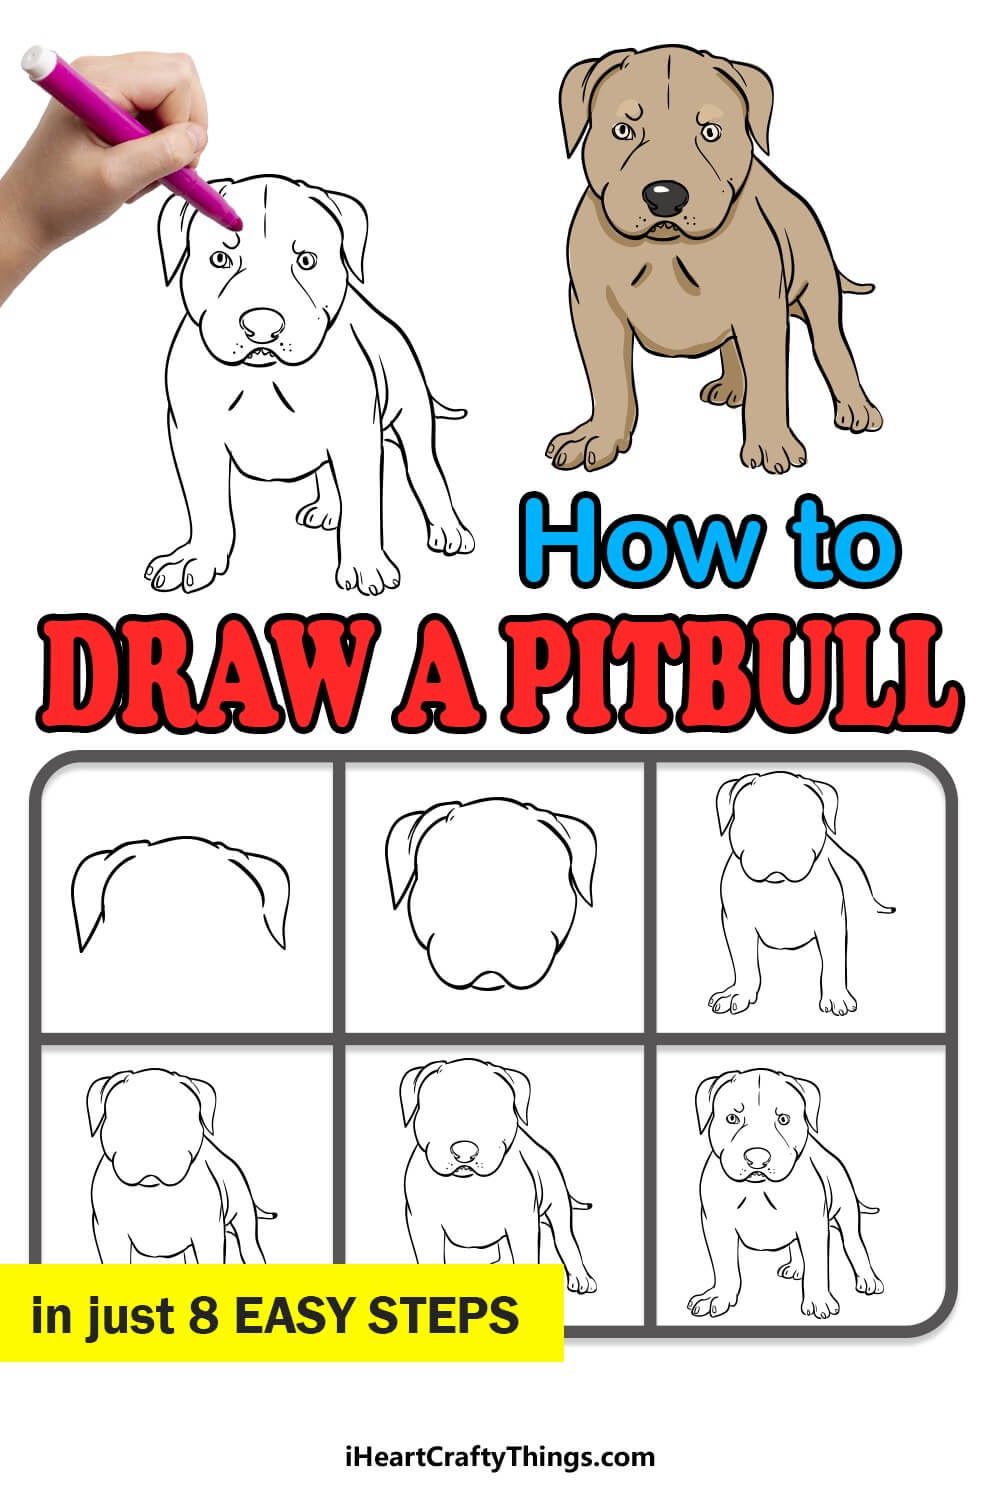 how-to-draw-a-pitbull-dog-3-1